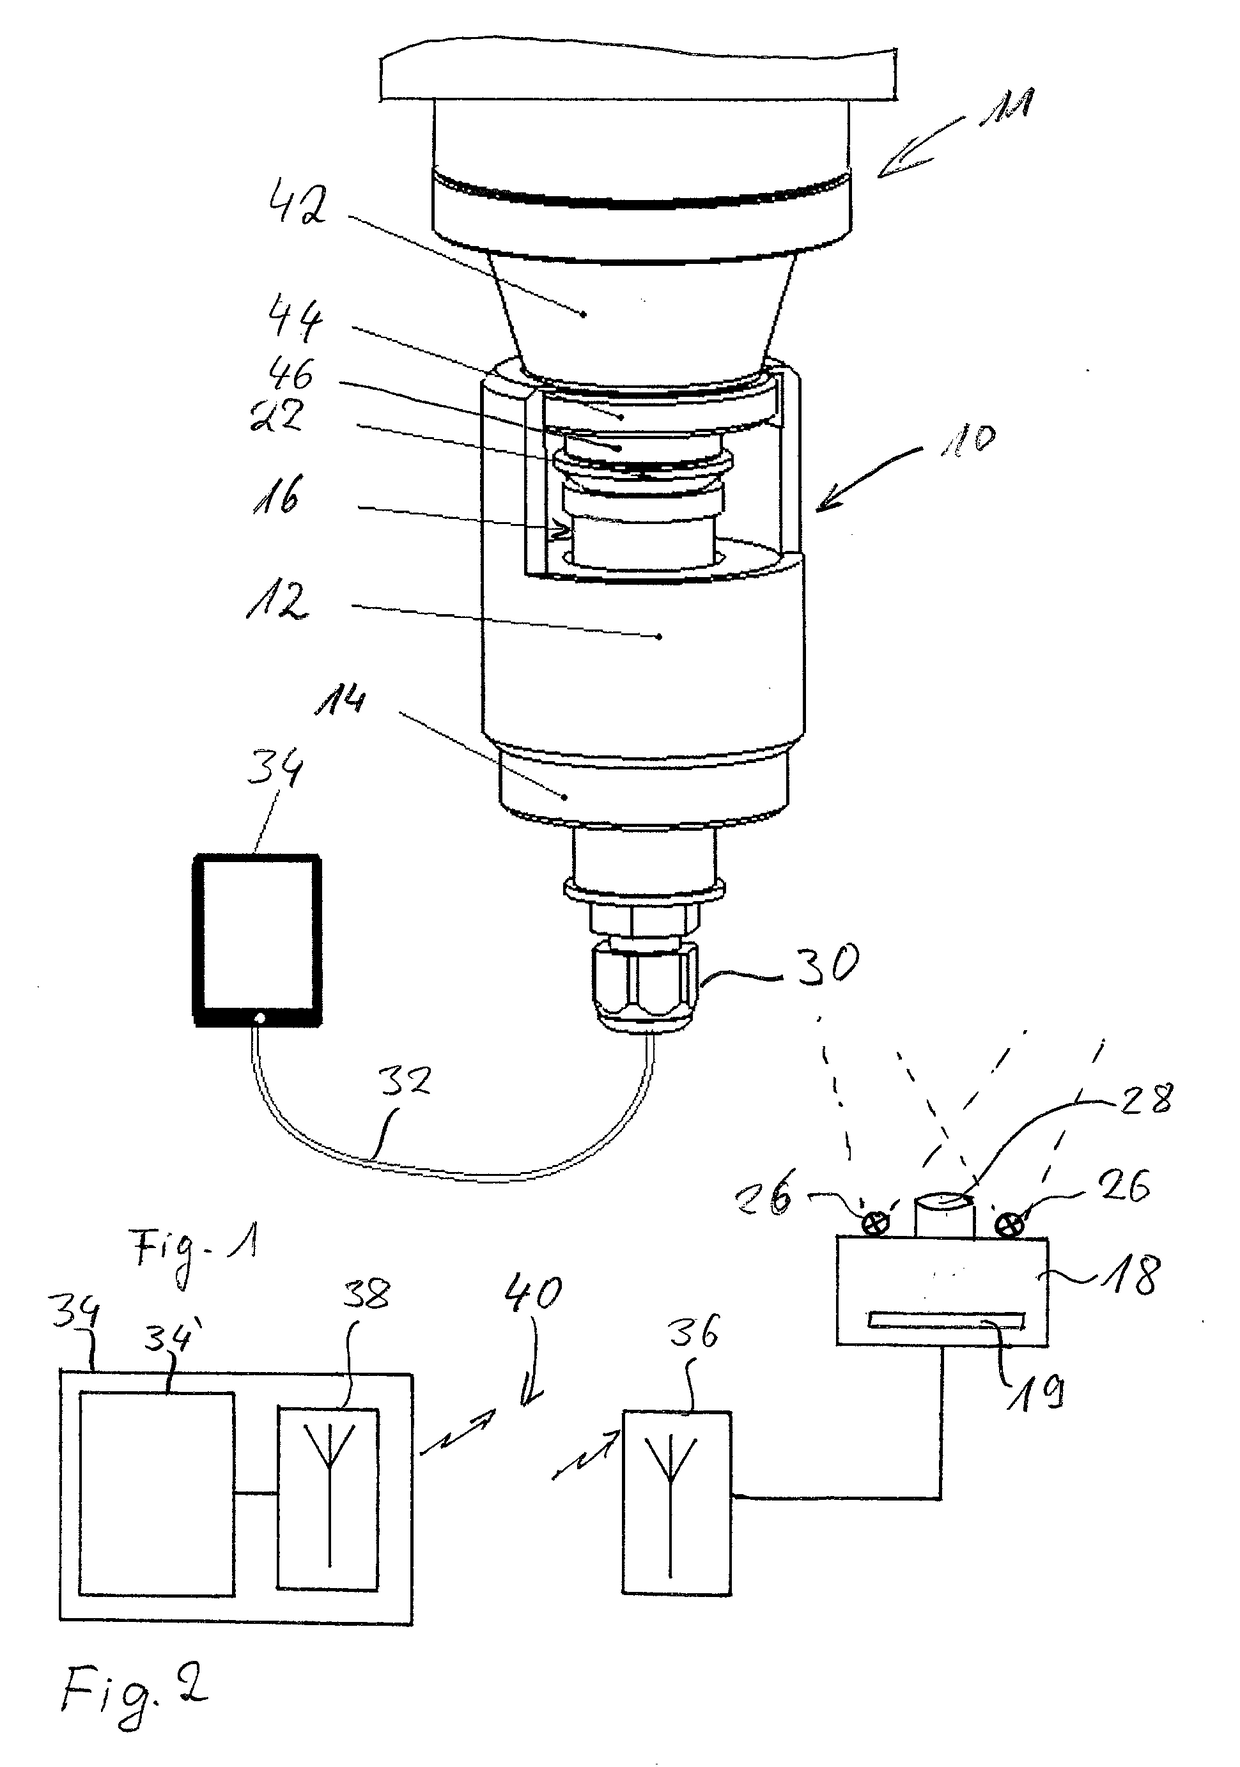 Sensor device for determining alignment/misalignment of a laser beam relative to a gas nozzle of a laser machining head